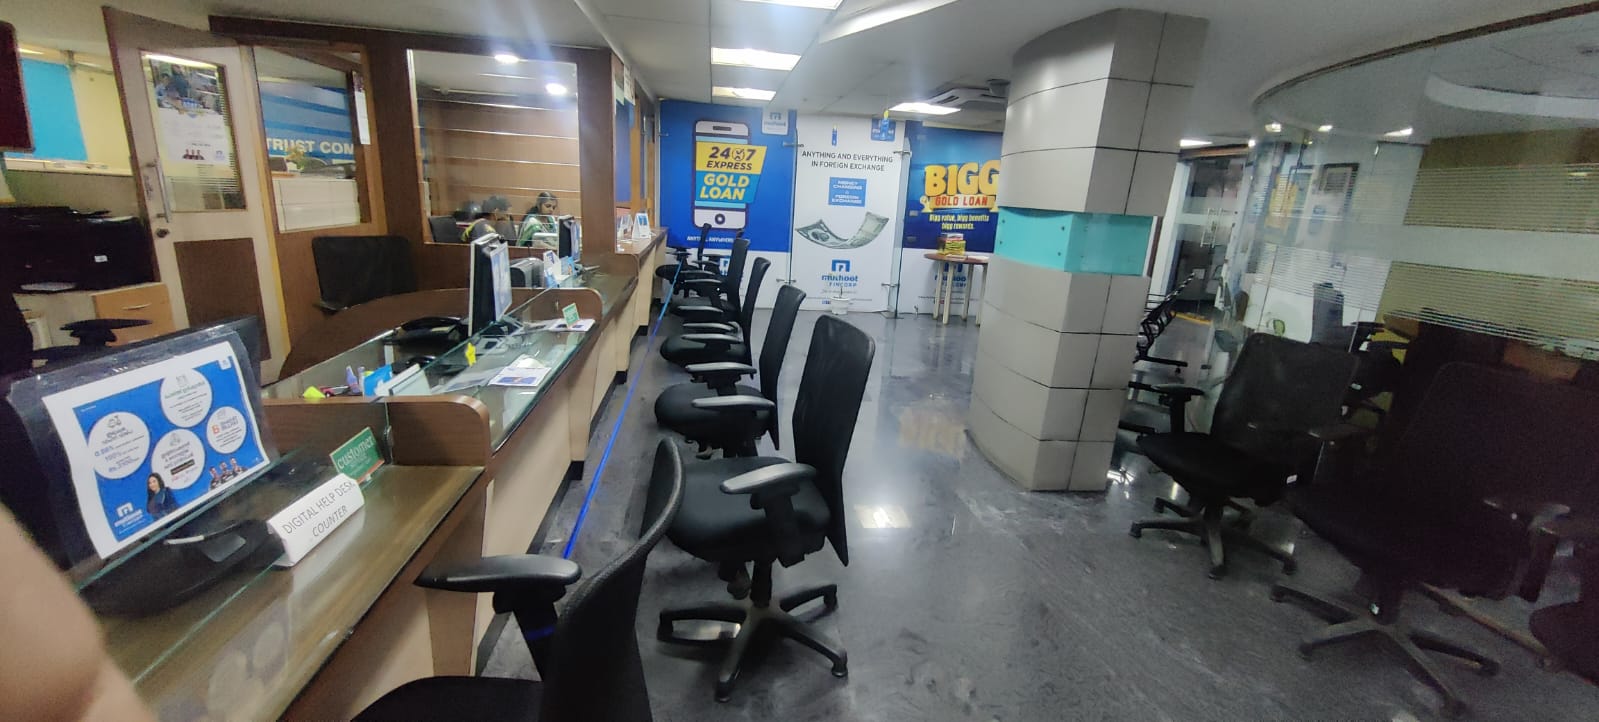 Photos and Videos of Muthoot Fincorp Gold Loan in Punnen Road, Thiruvananthapuram